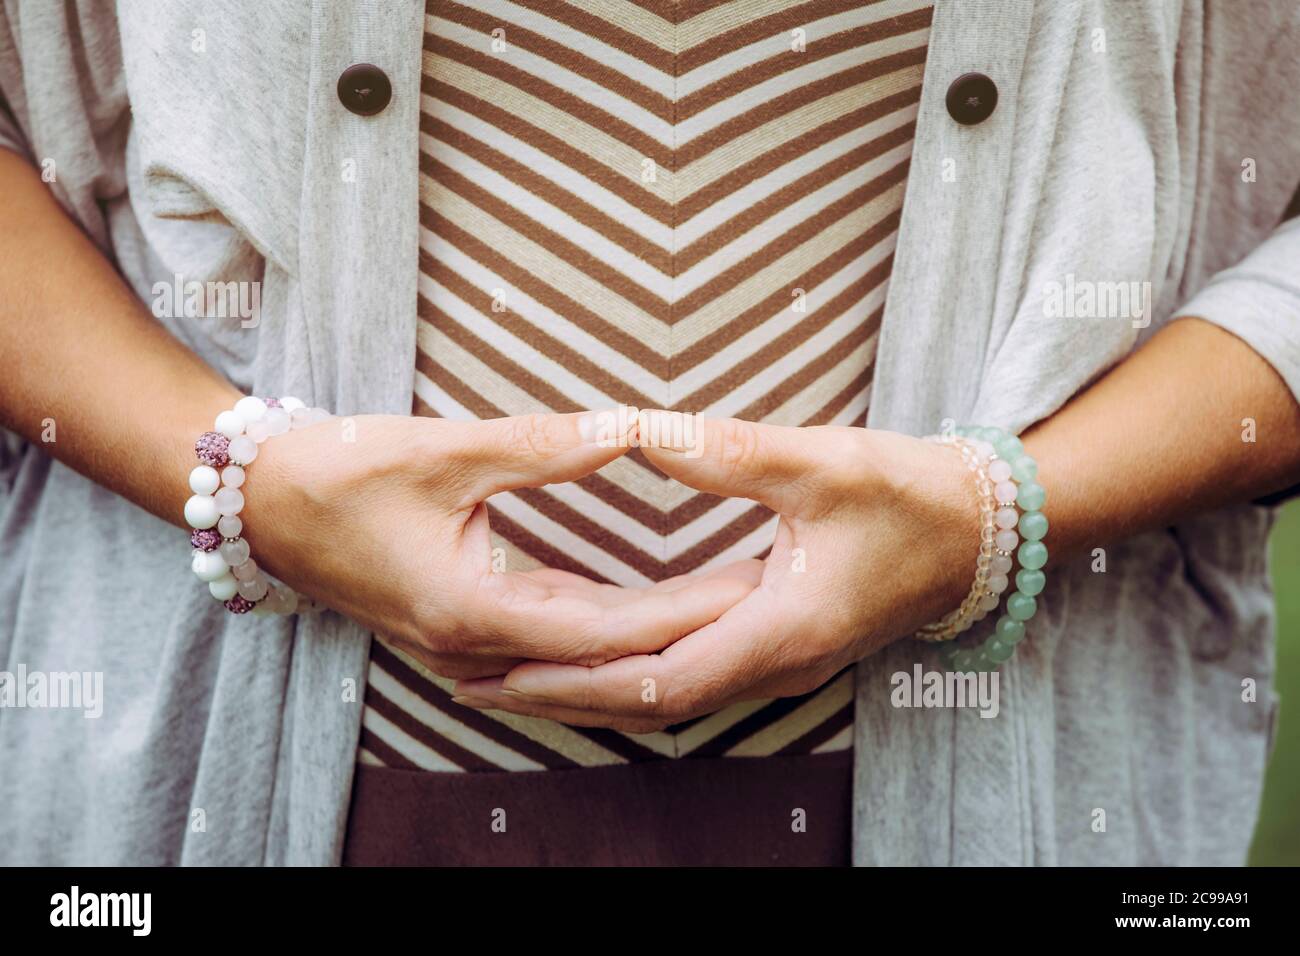 Close up view of woman hands doing meditation Dhyana mudra gesture also known as Samadhi mudra. Stock Photo